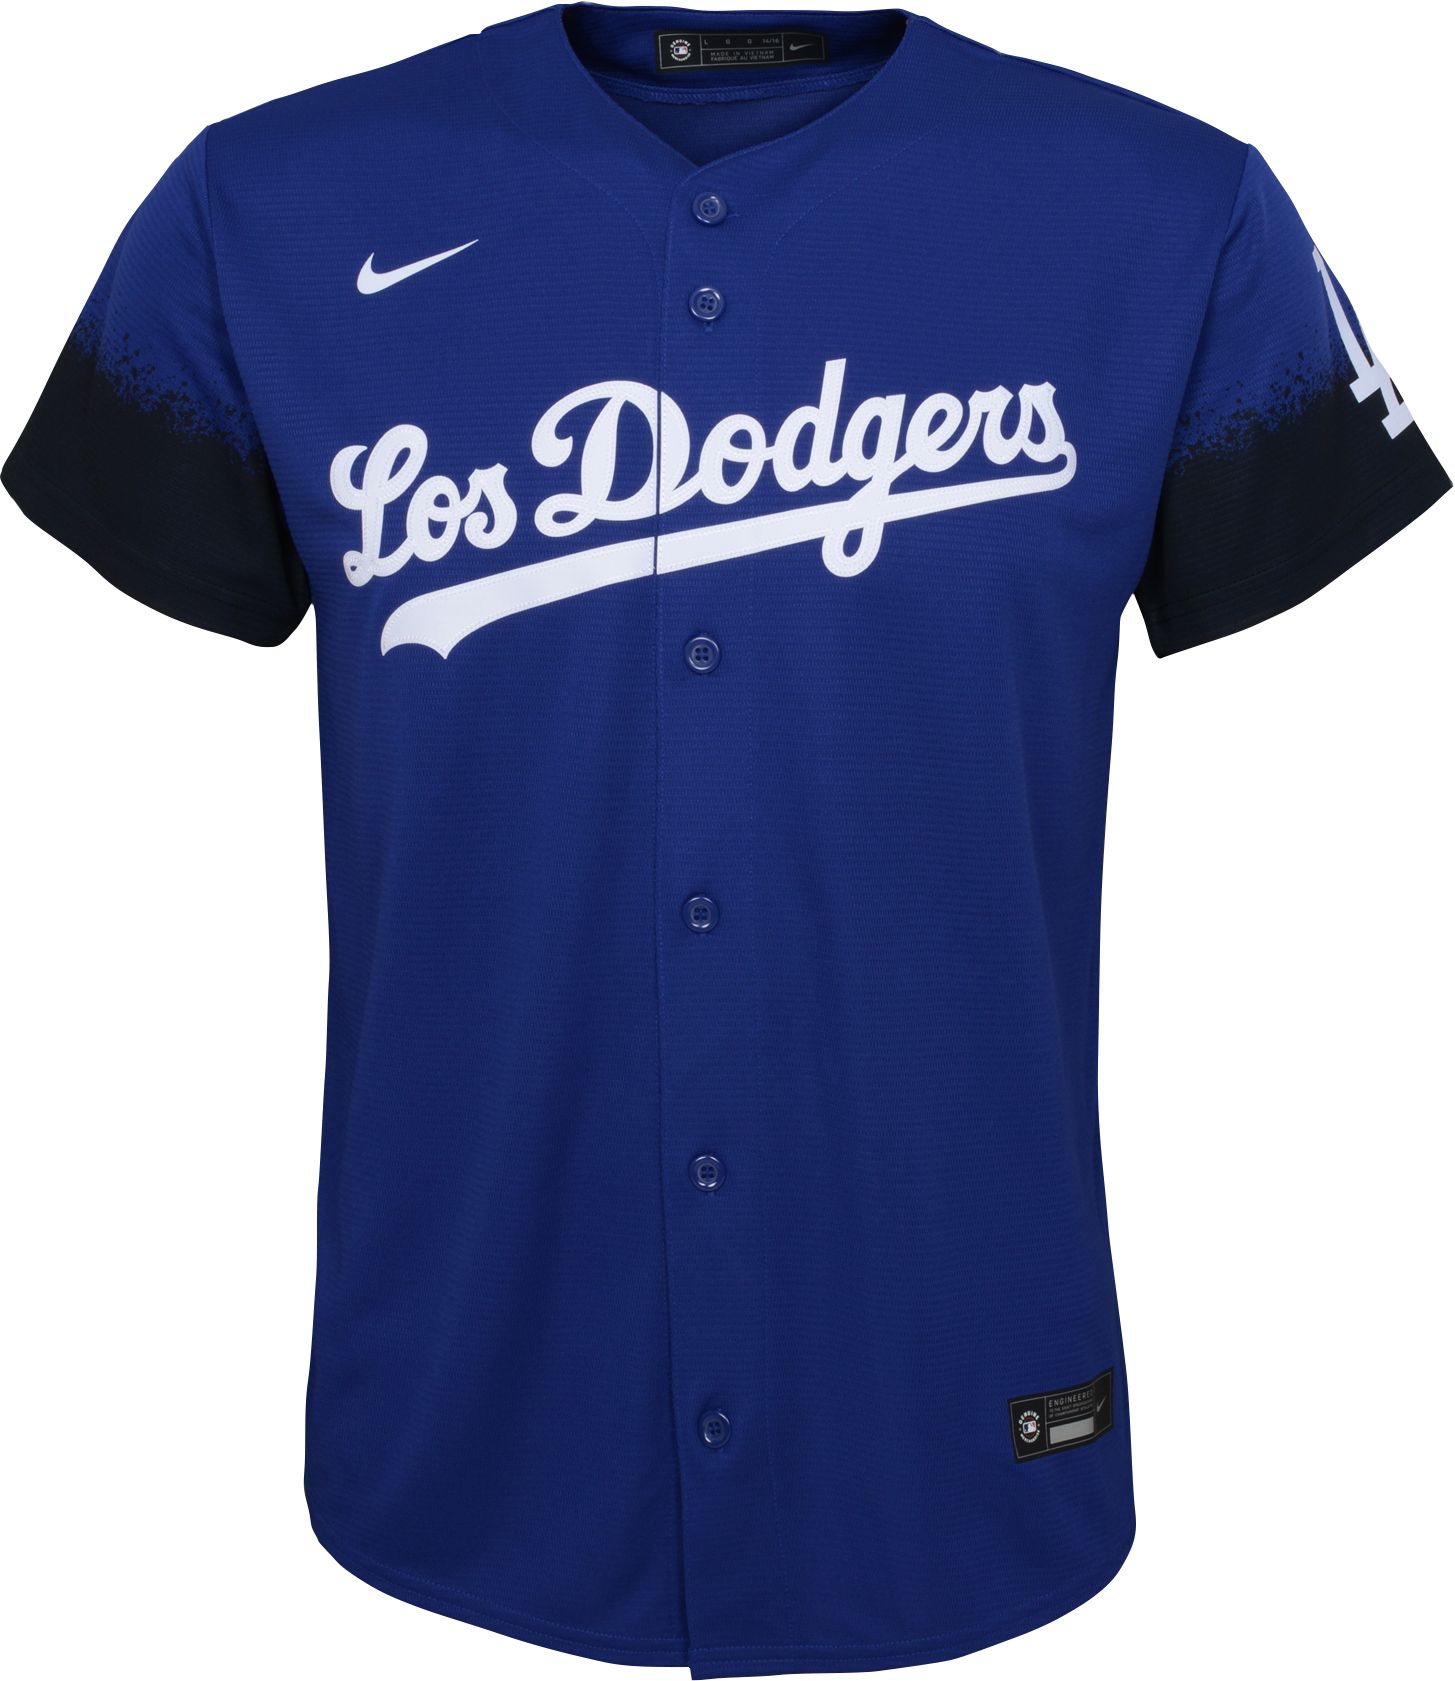 Nike Men's Los Angeles Dodgers Mookie Betts #50 Royal 2021 City Connect  Cool Base Jersey